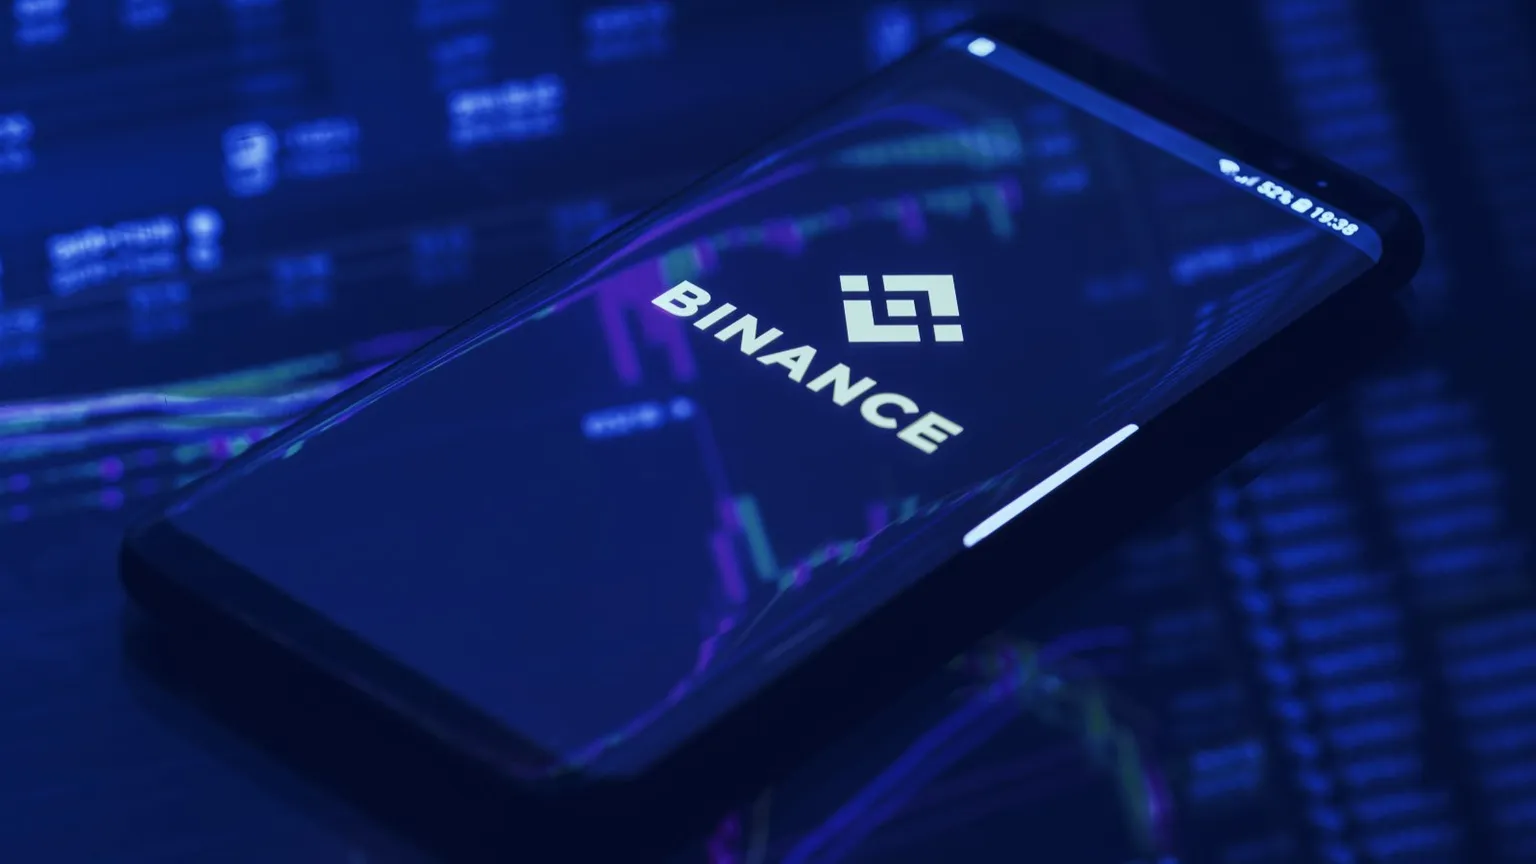 Binance is one of the largest crypto exchanges in the world. Image: Shutterstock.